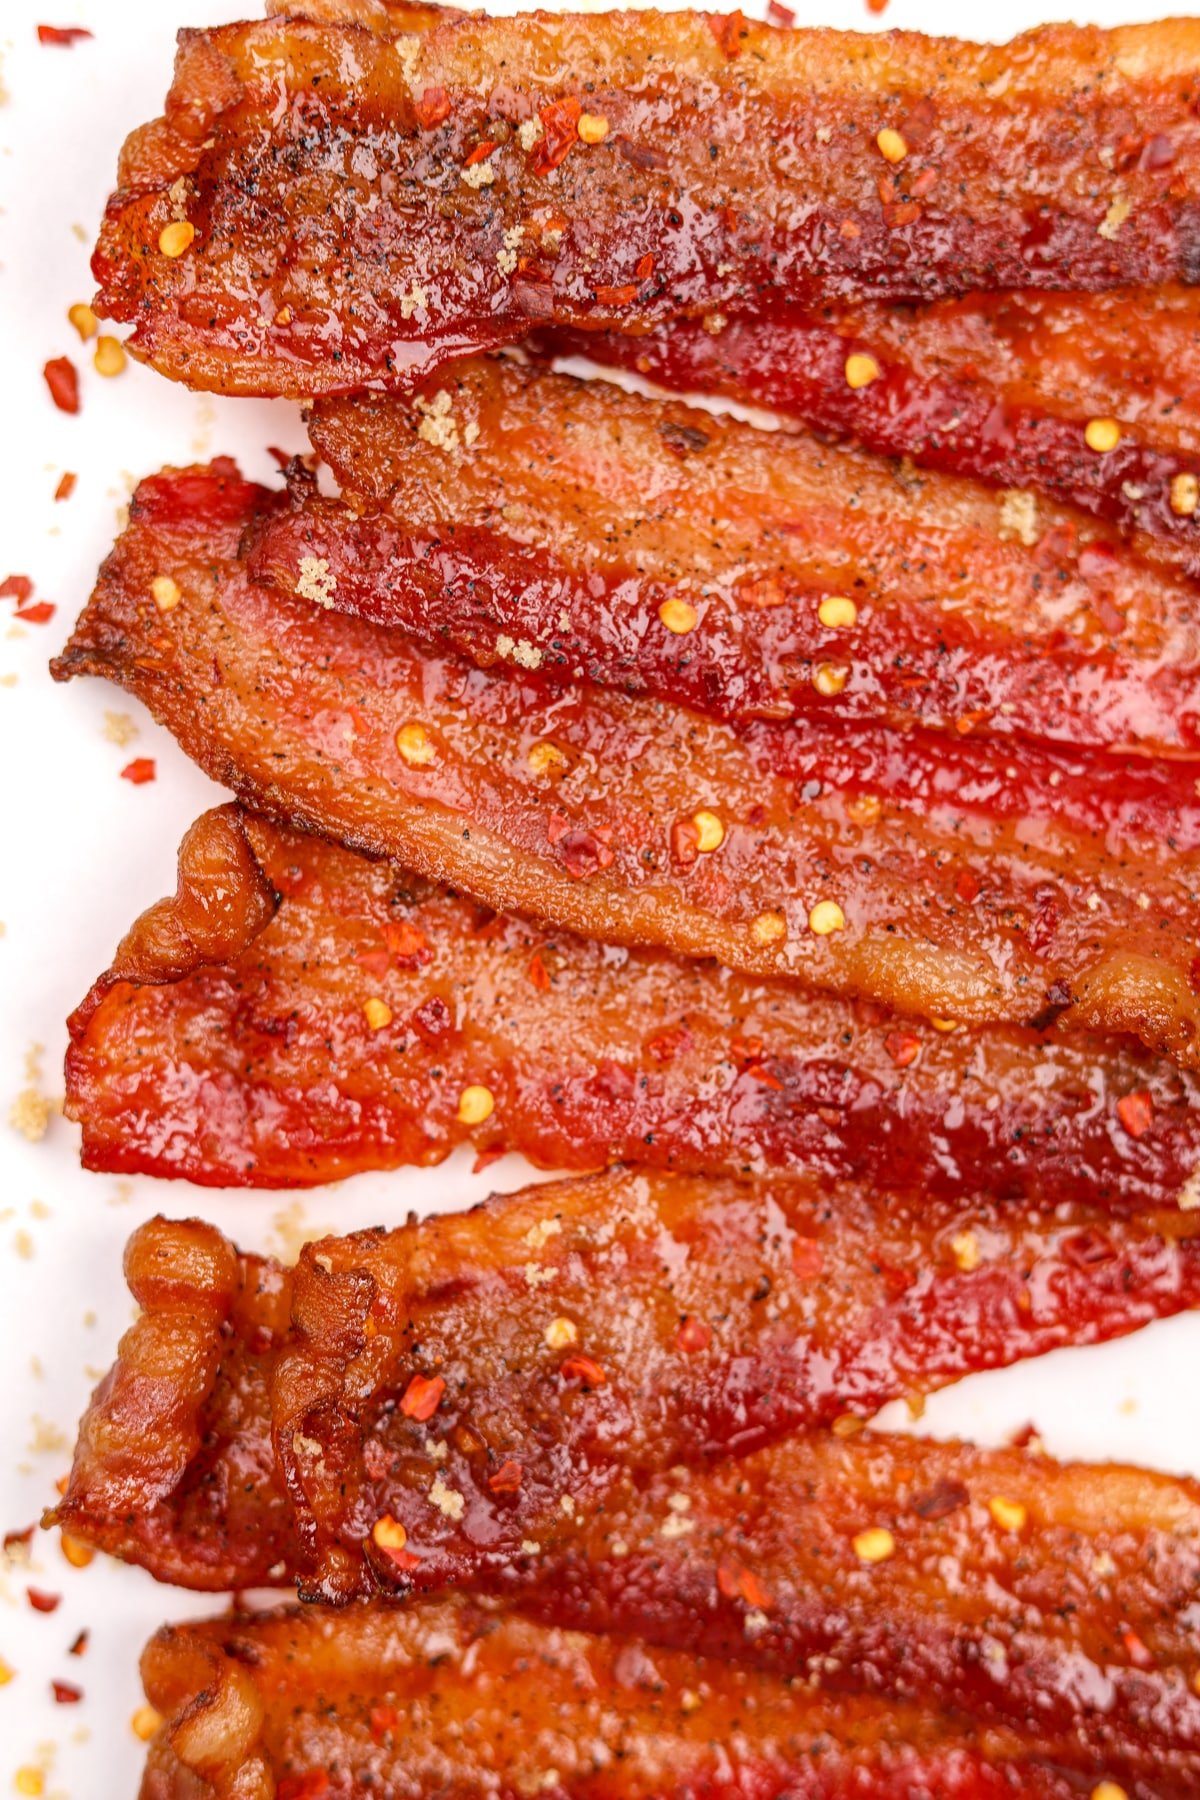 Slices of cooked bacon dotted with red pepper flakes.